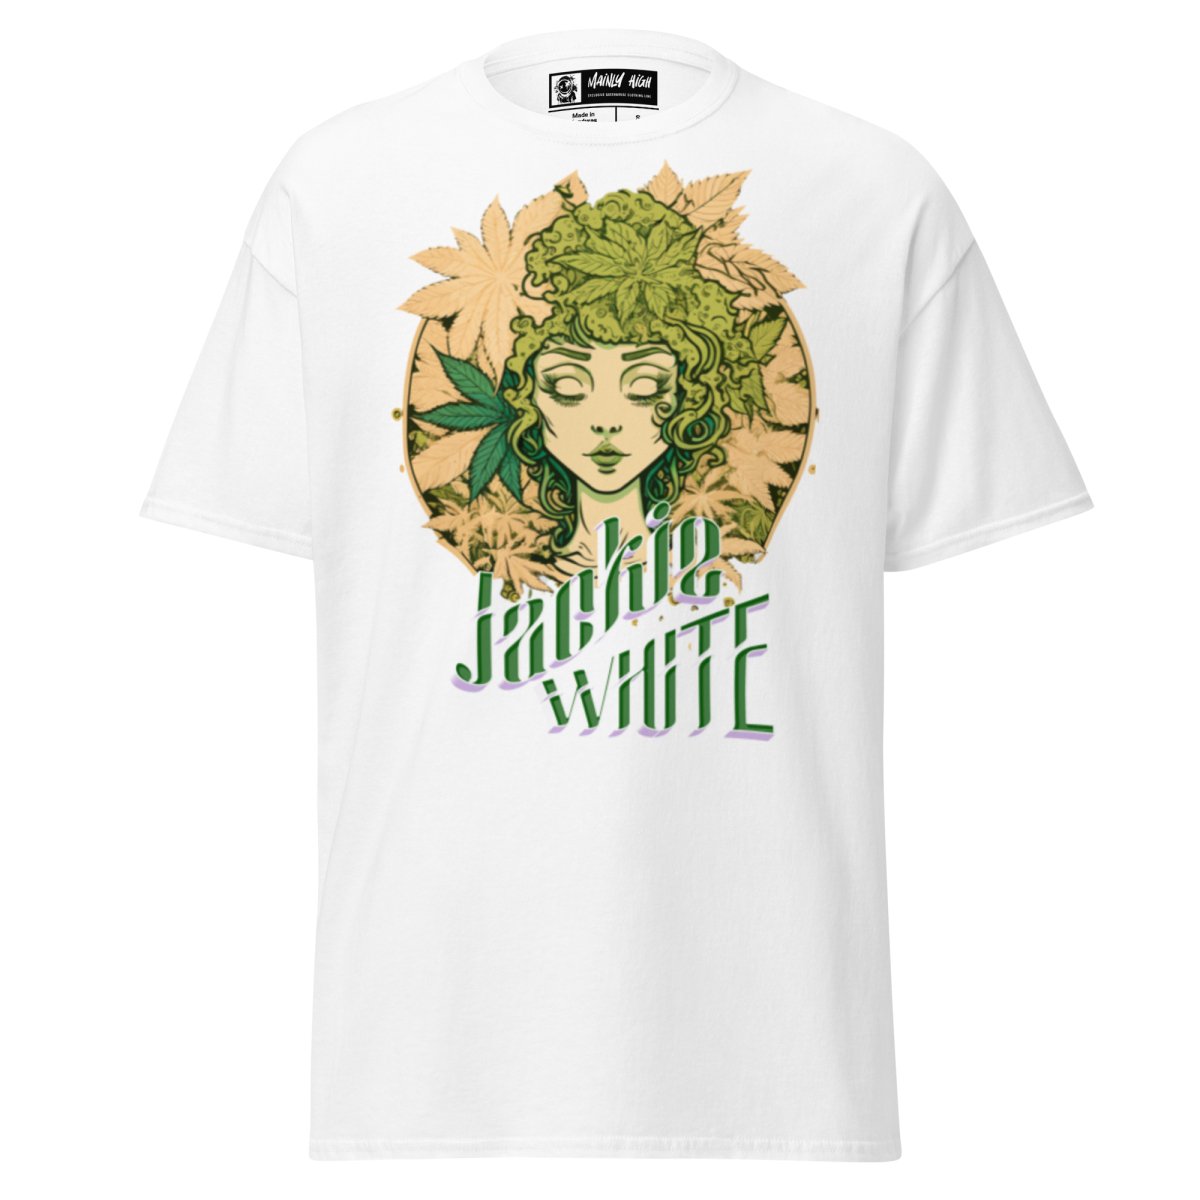 Jackie White T-Shirt - Mainly High